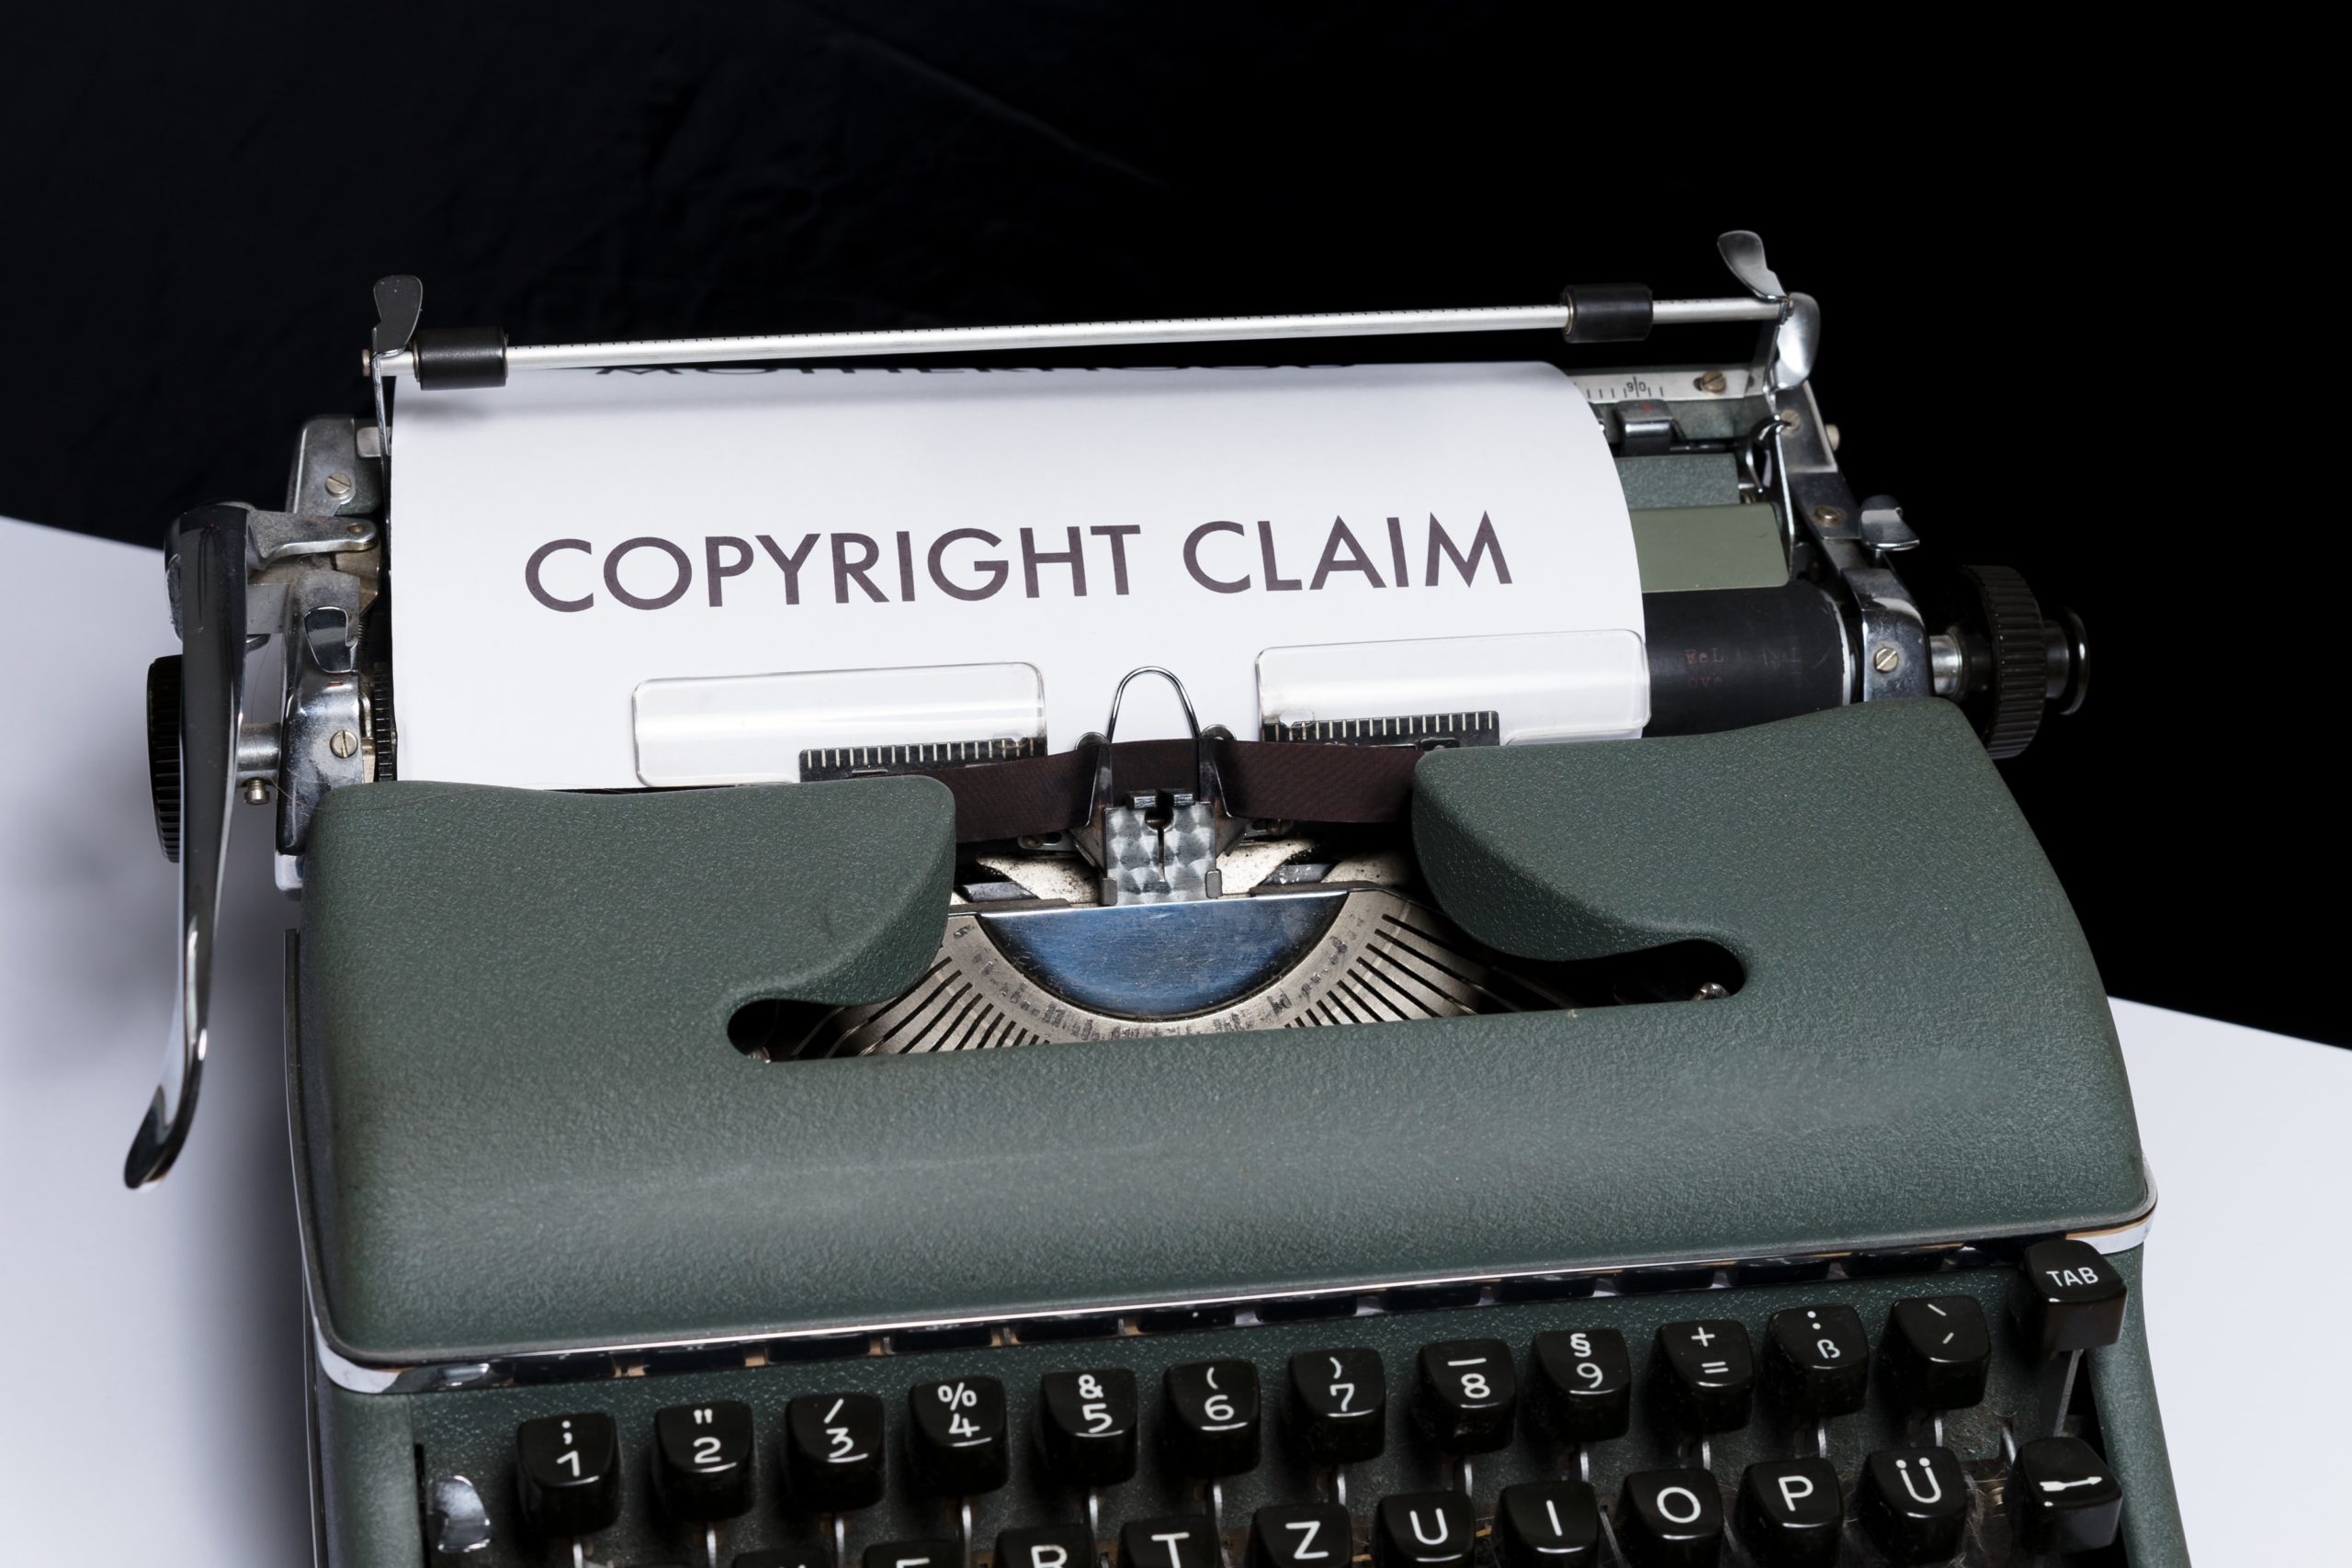 Copyright claim printed on a paper in a typewriter speaking about liability insurance.